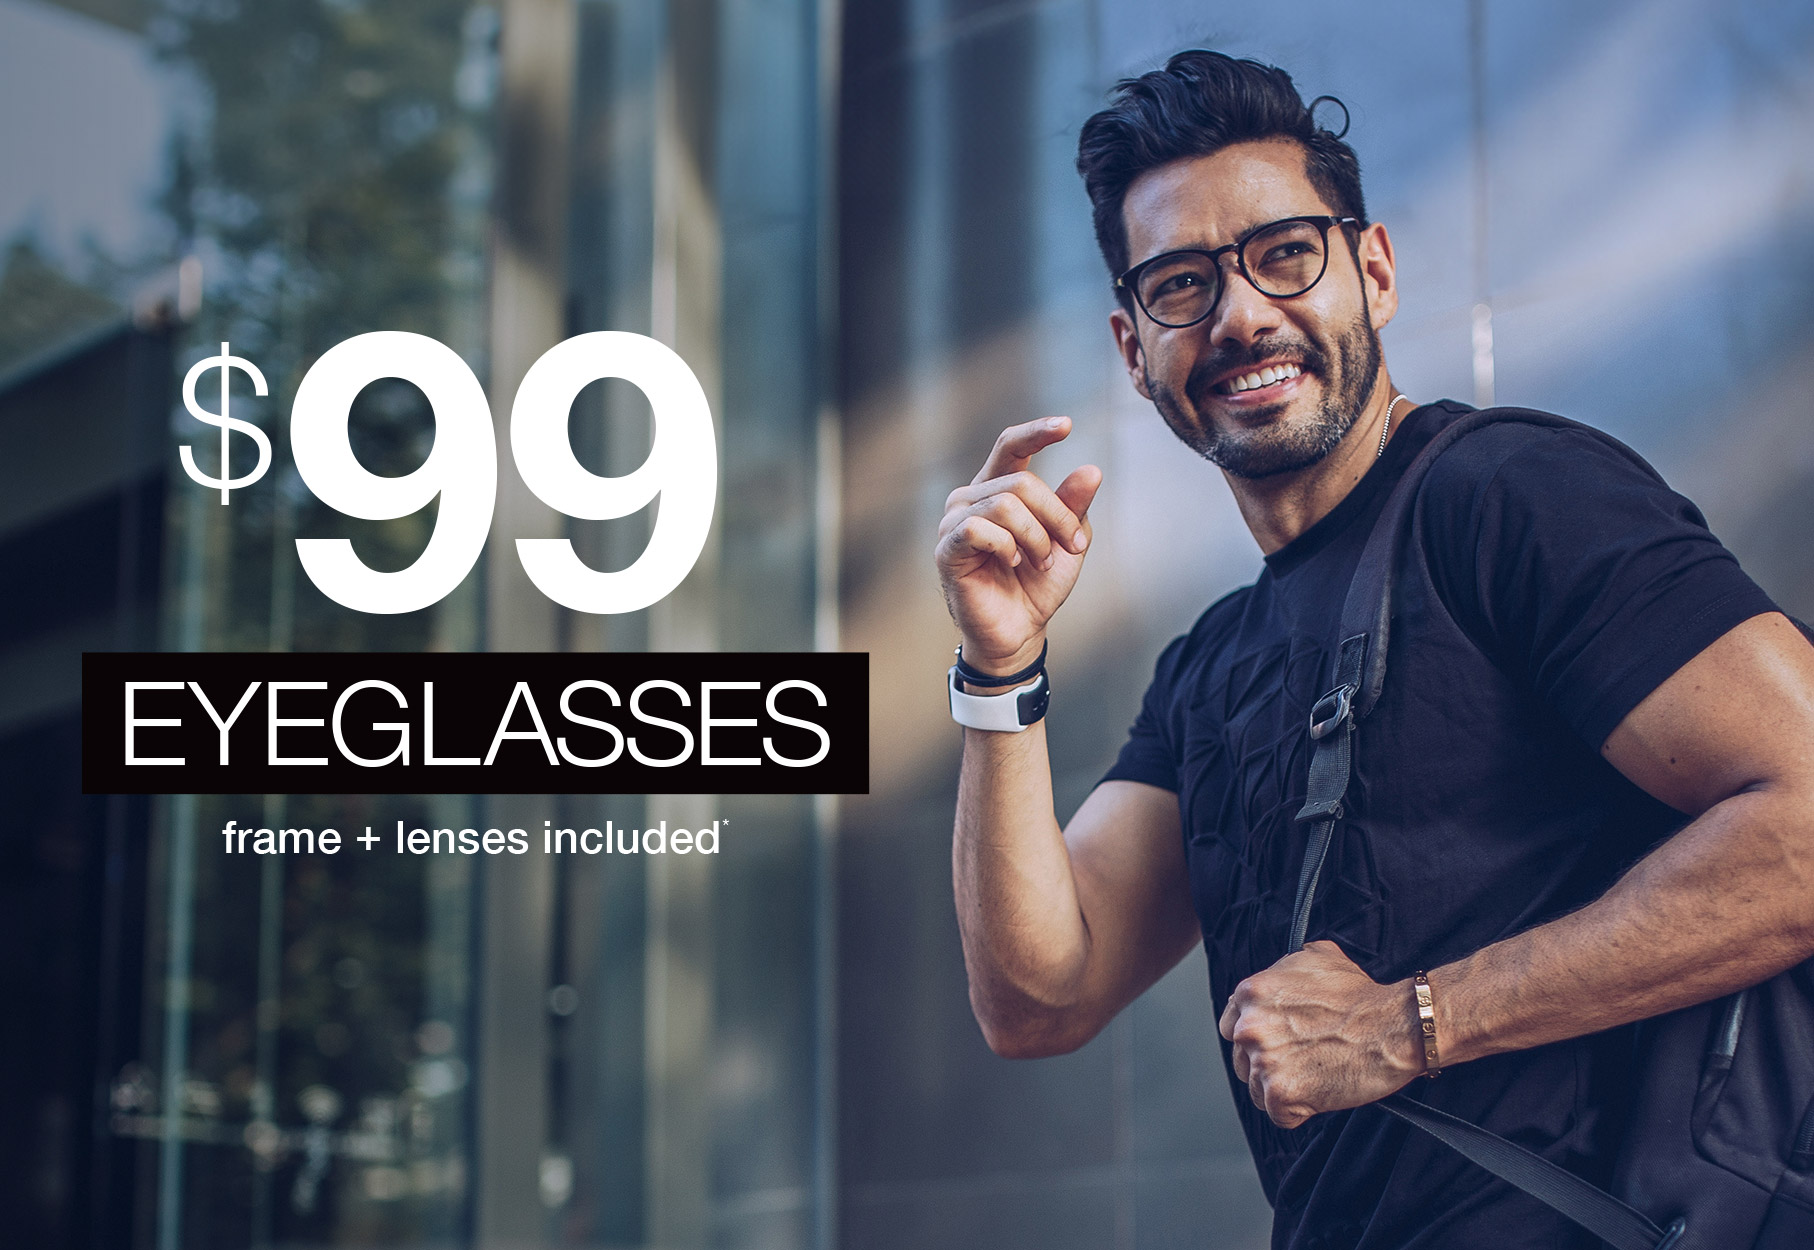 Text: $99 Eyeglasses frame + lenses included* Photo: smiling man wearing eyglasses and a black t-shirt with a backpack over his shoulder